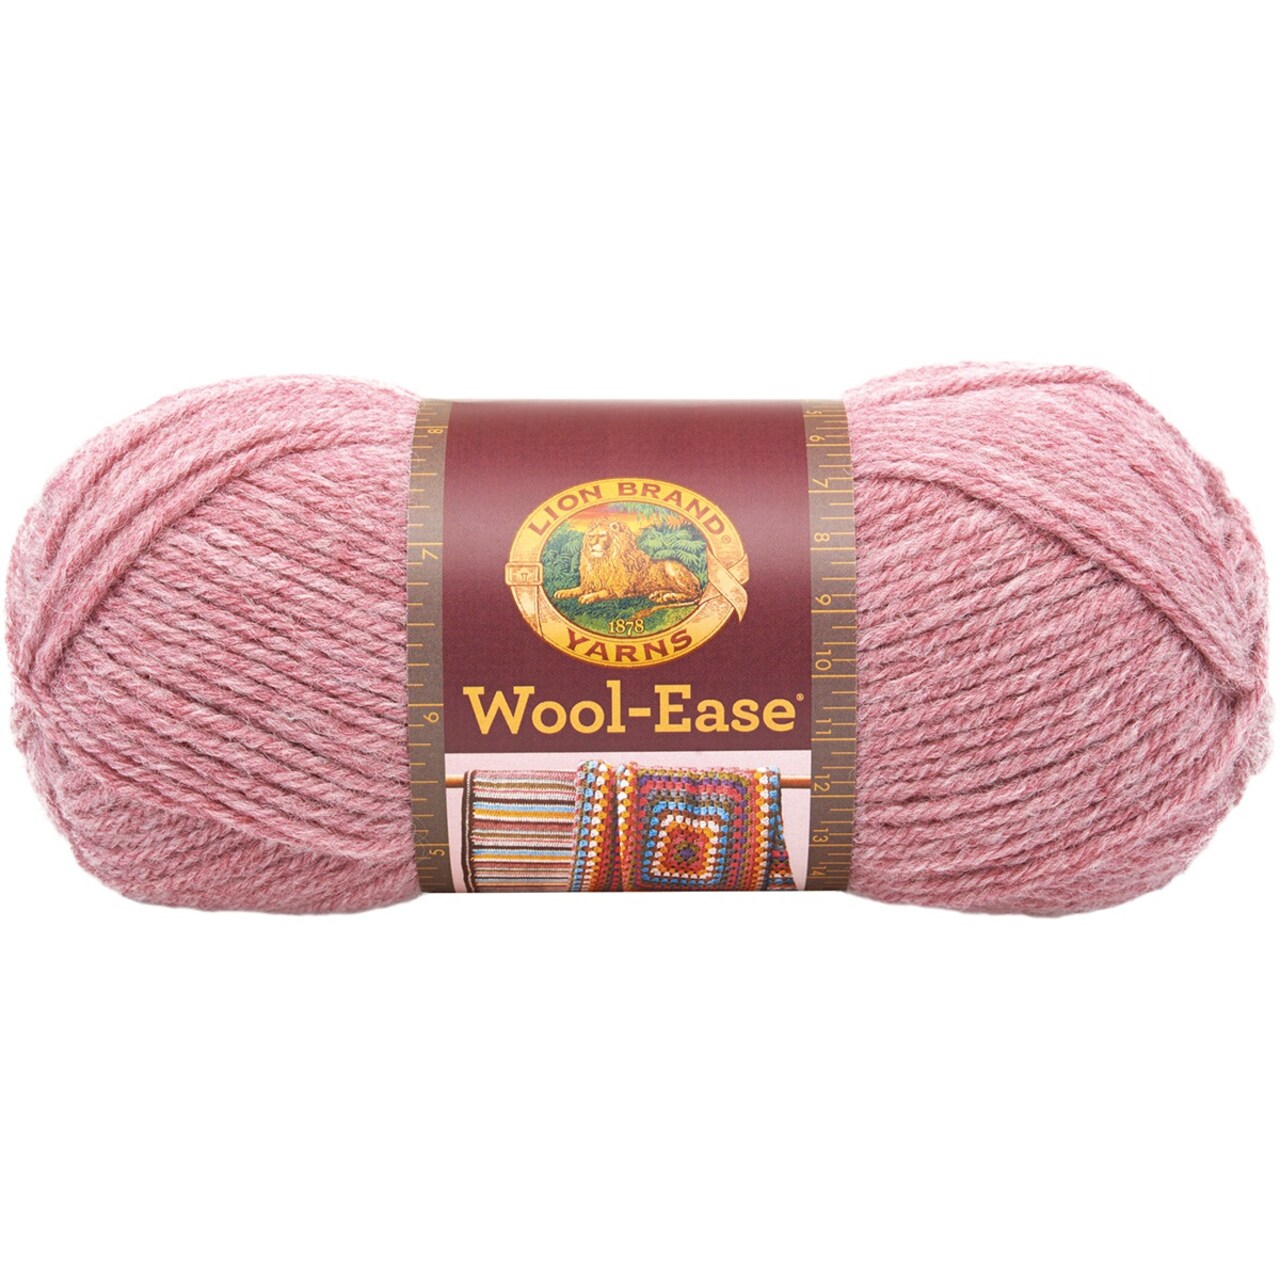 Multipack of 20 - Lion Brand Wool-Ease Yarn -Rose Heather